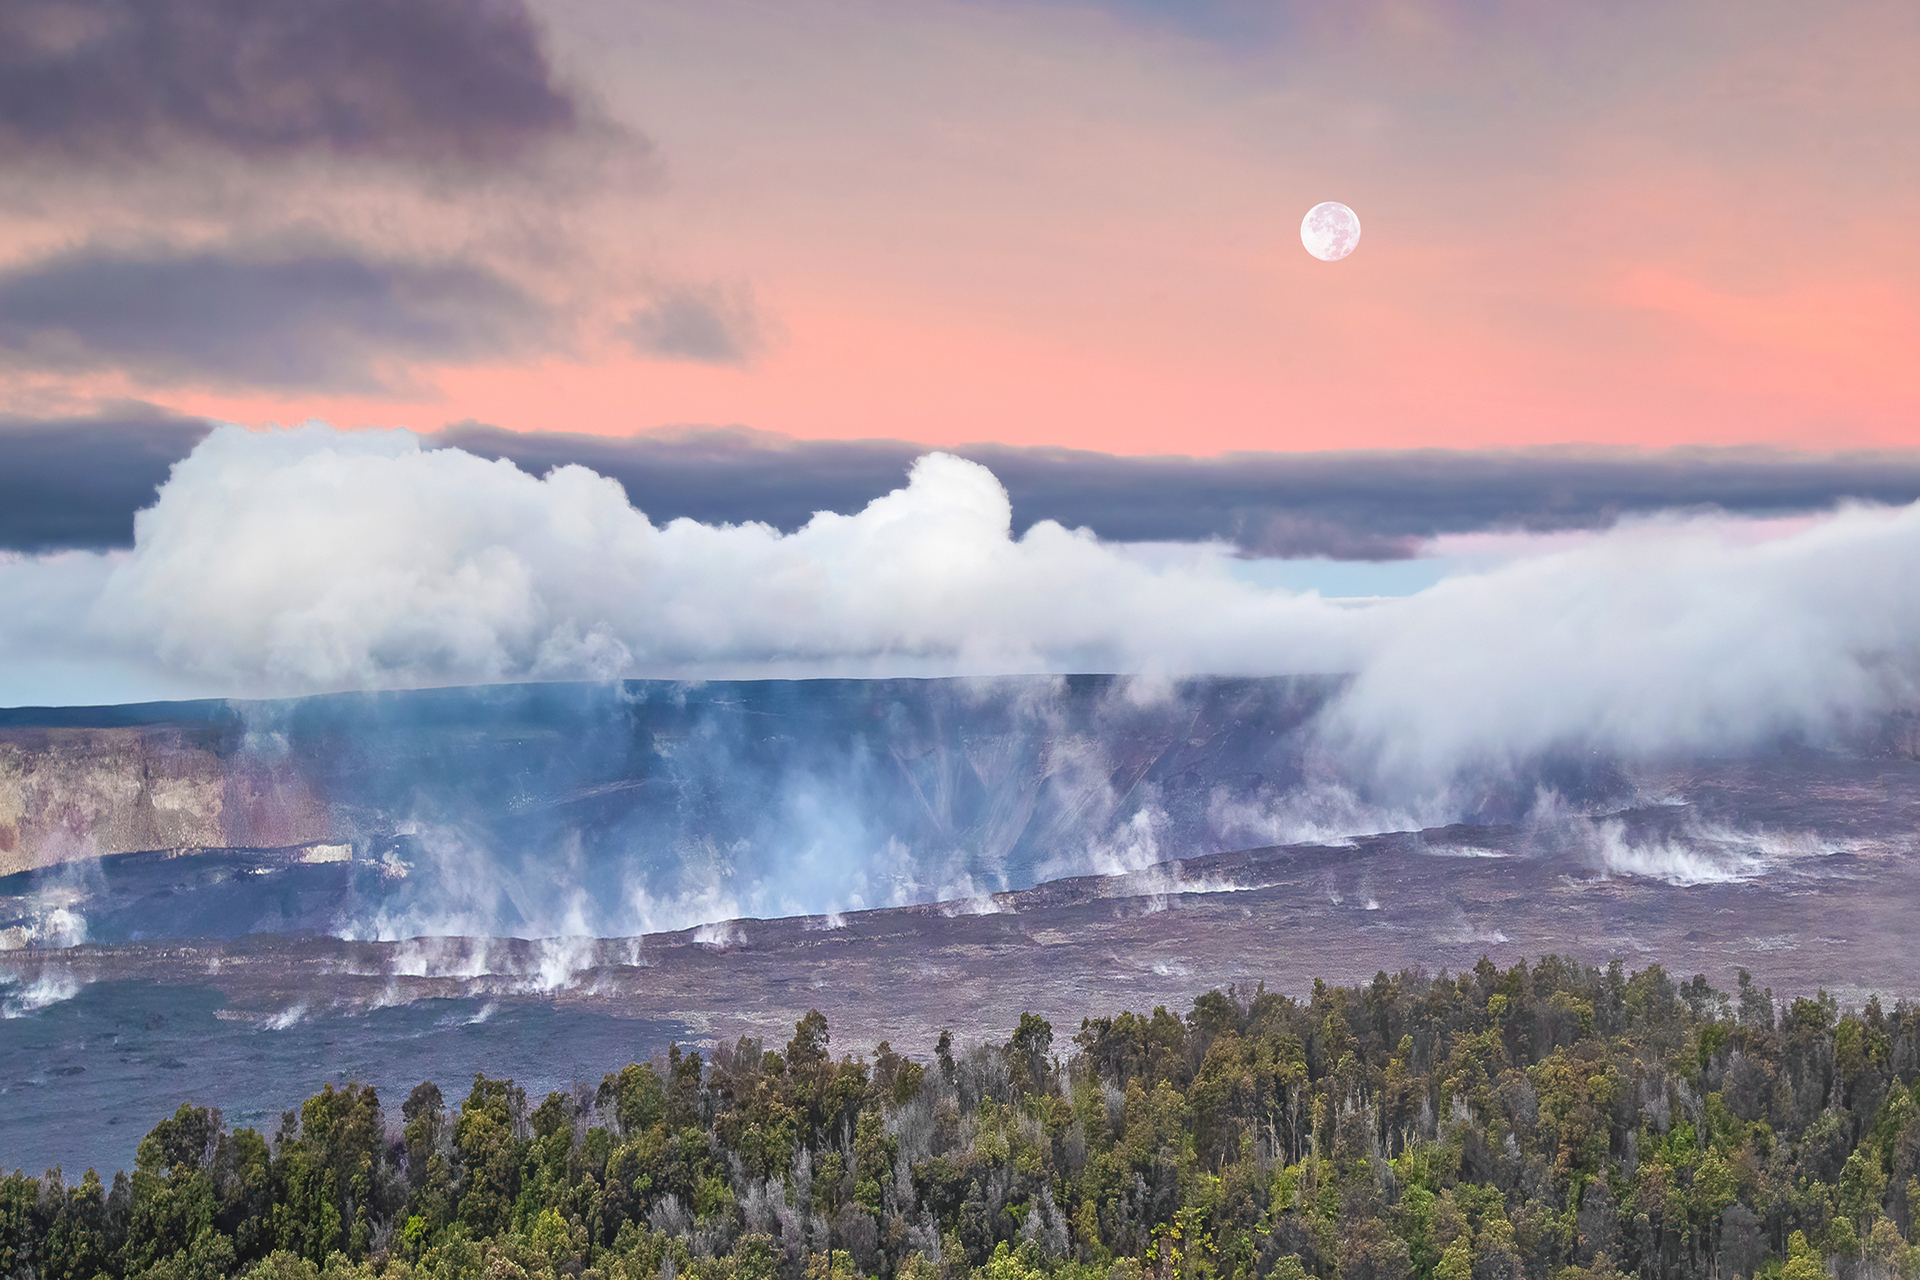 Full moon above a steaming volcanic crater